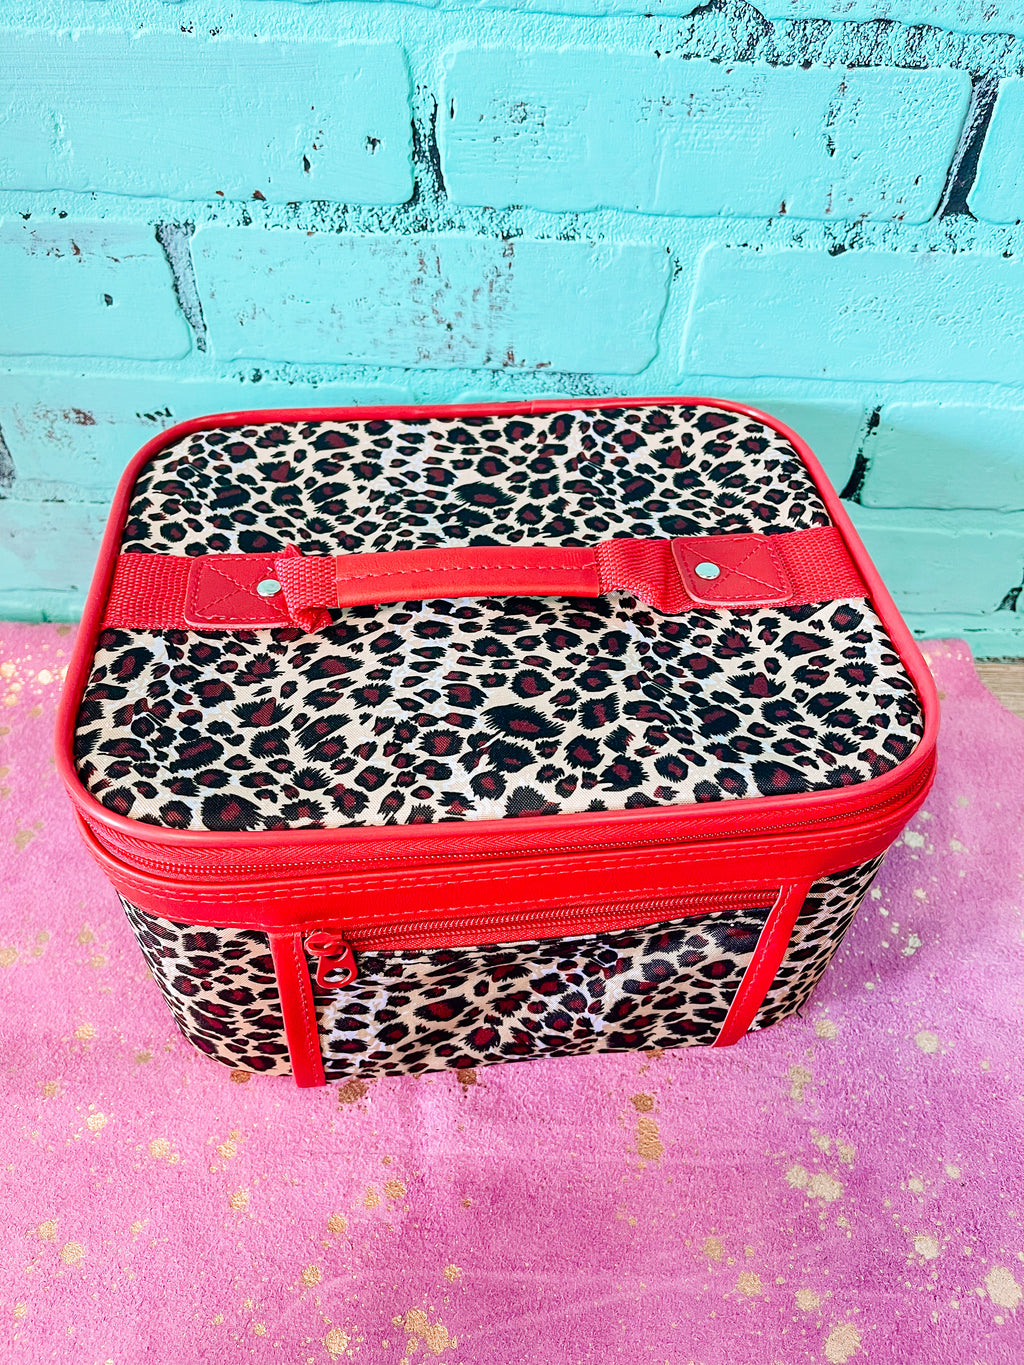 Leopard with Red Makeup Case - Large